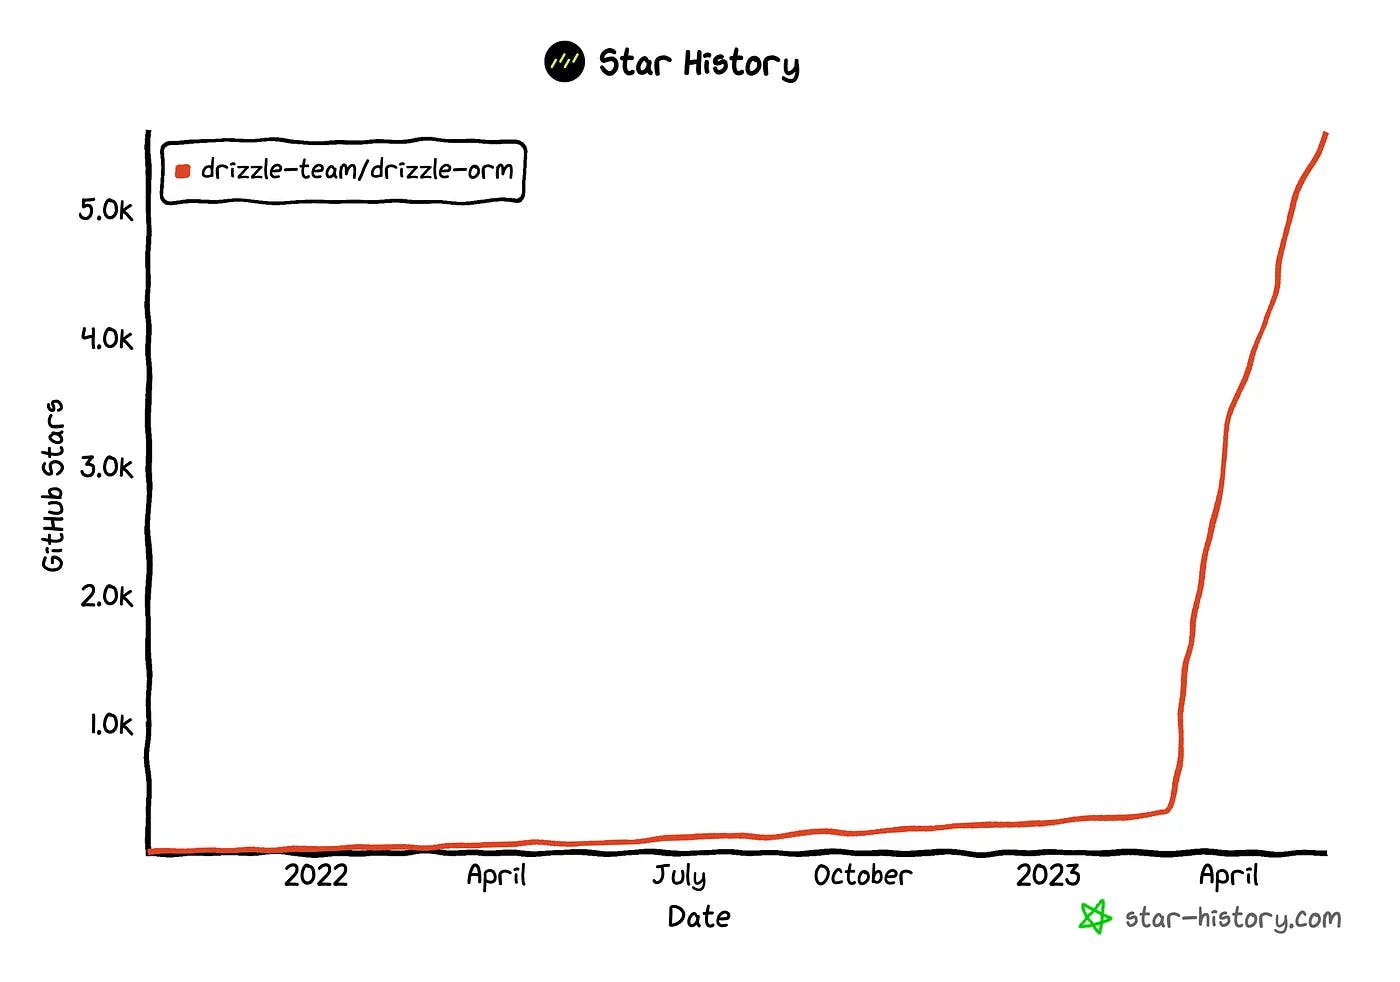 Drizzle ORM star history